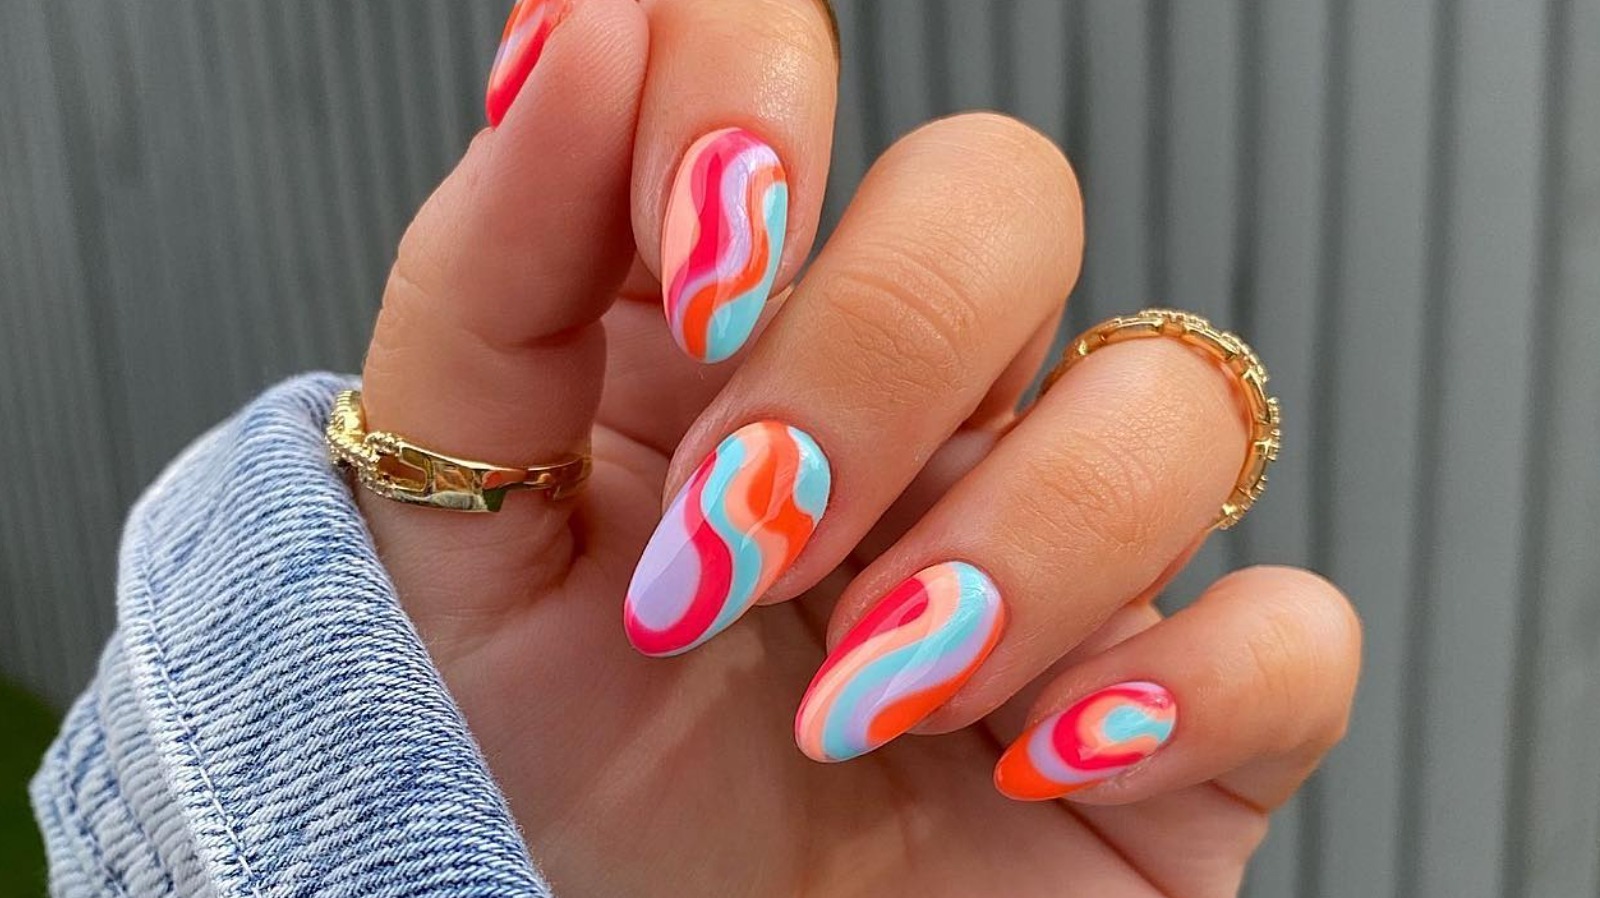 5. 70s Inspired Nails - wide 3